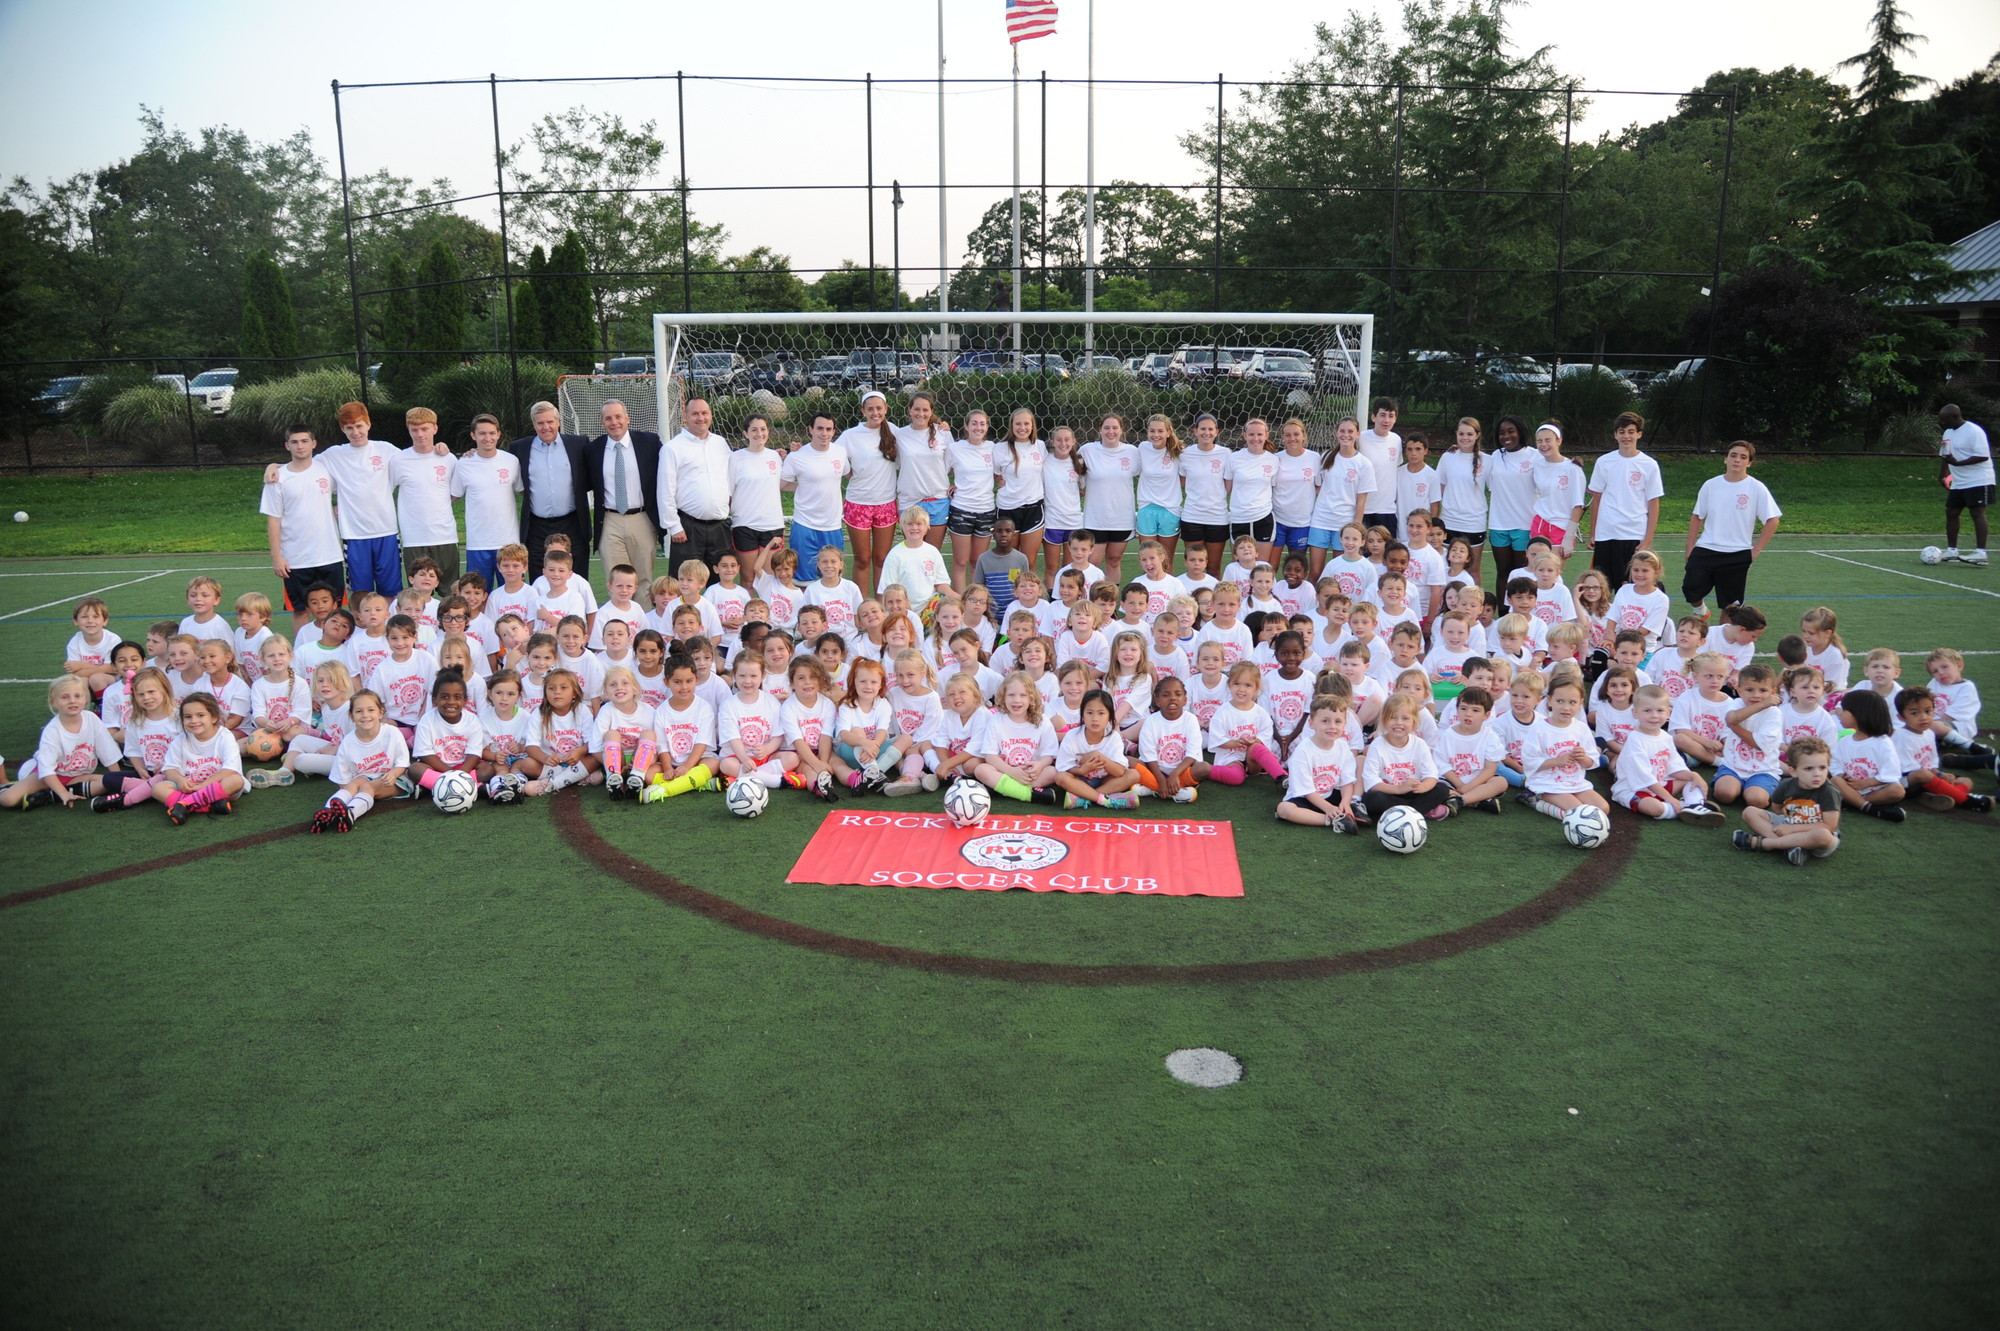 Dozens of people came to Skelos Field for the soccer camp.